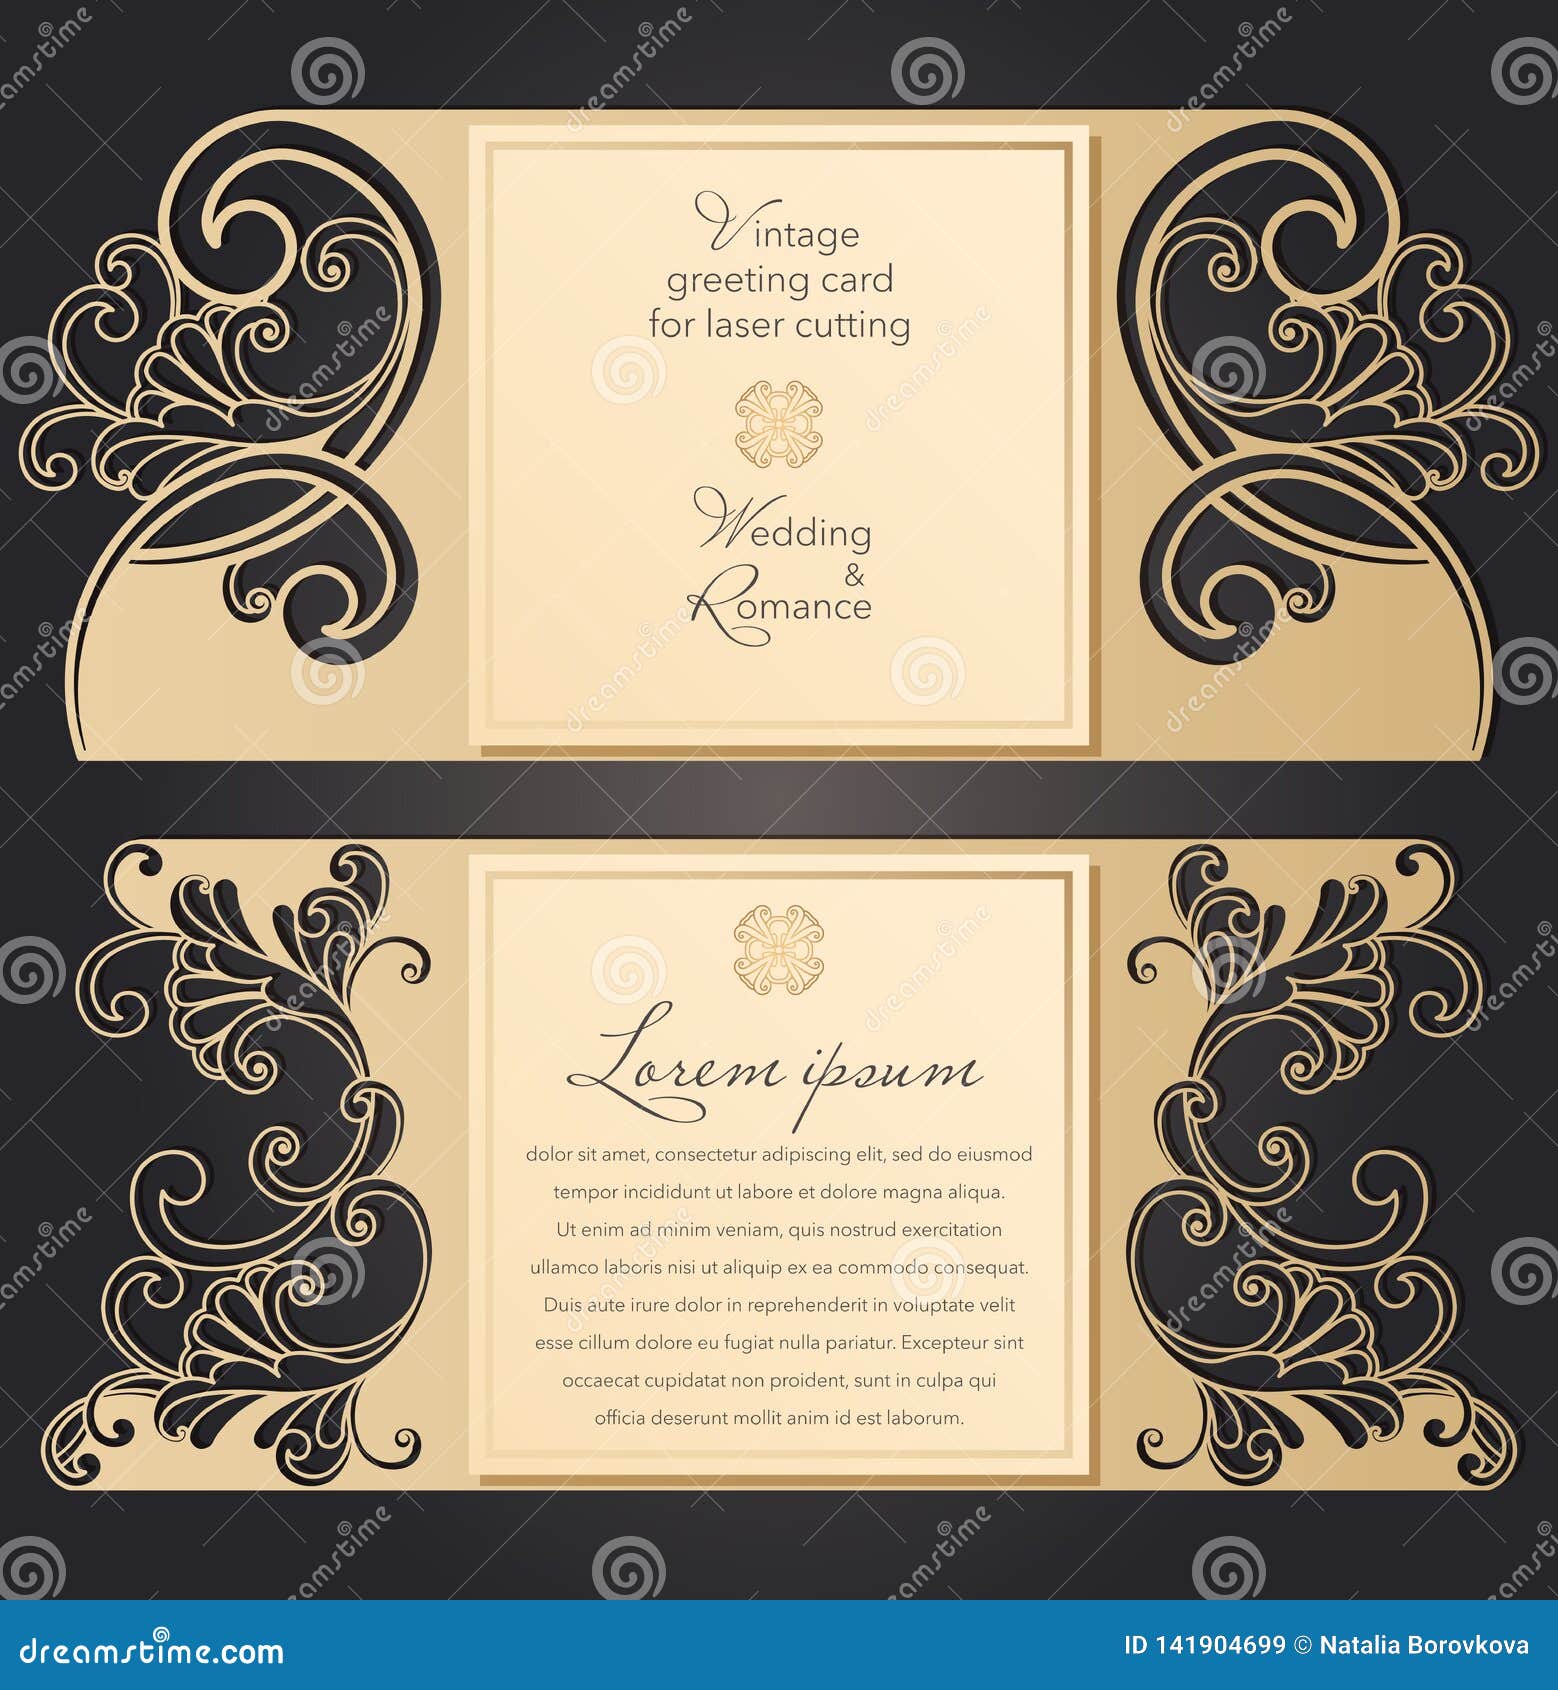 Details about   Wedding Invitation Laser Cut Floral Design Scenic Style For Event Party Supplies 